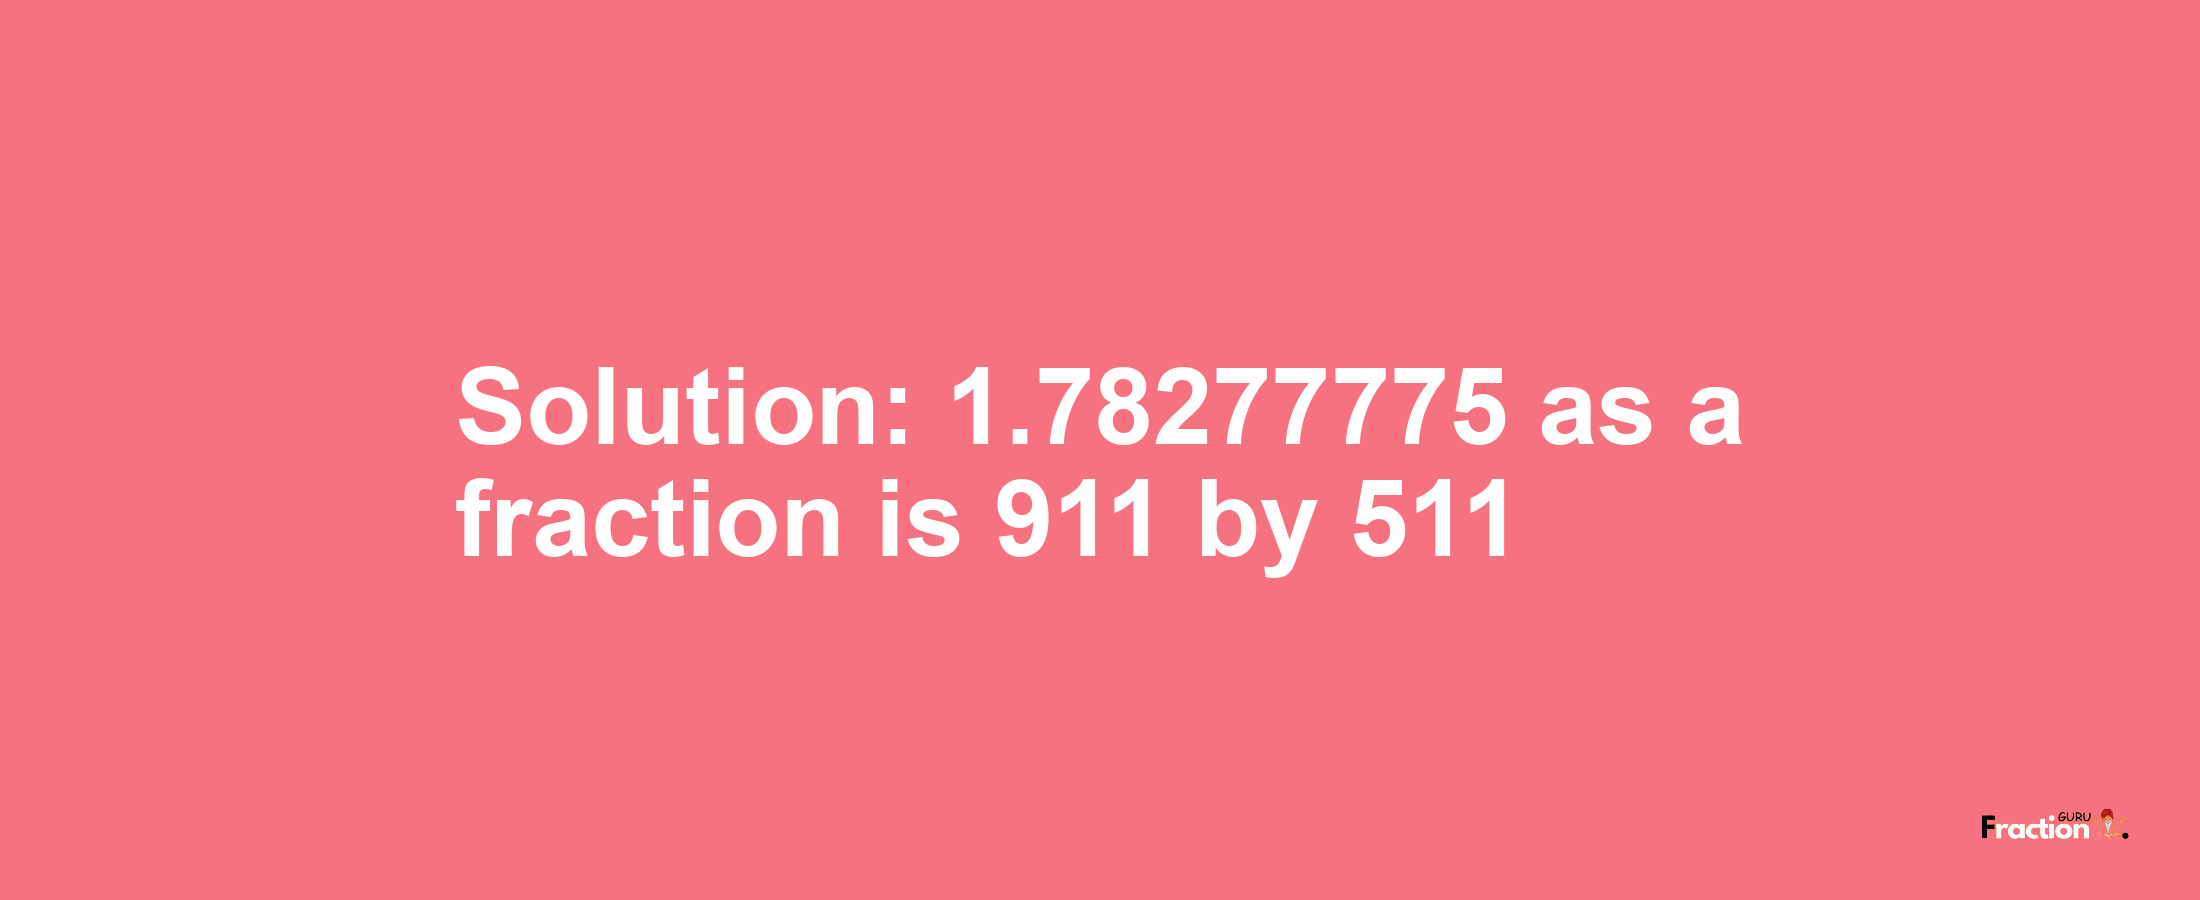 Solution:1.78277775 as a fraction is 911/511